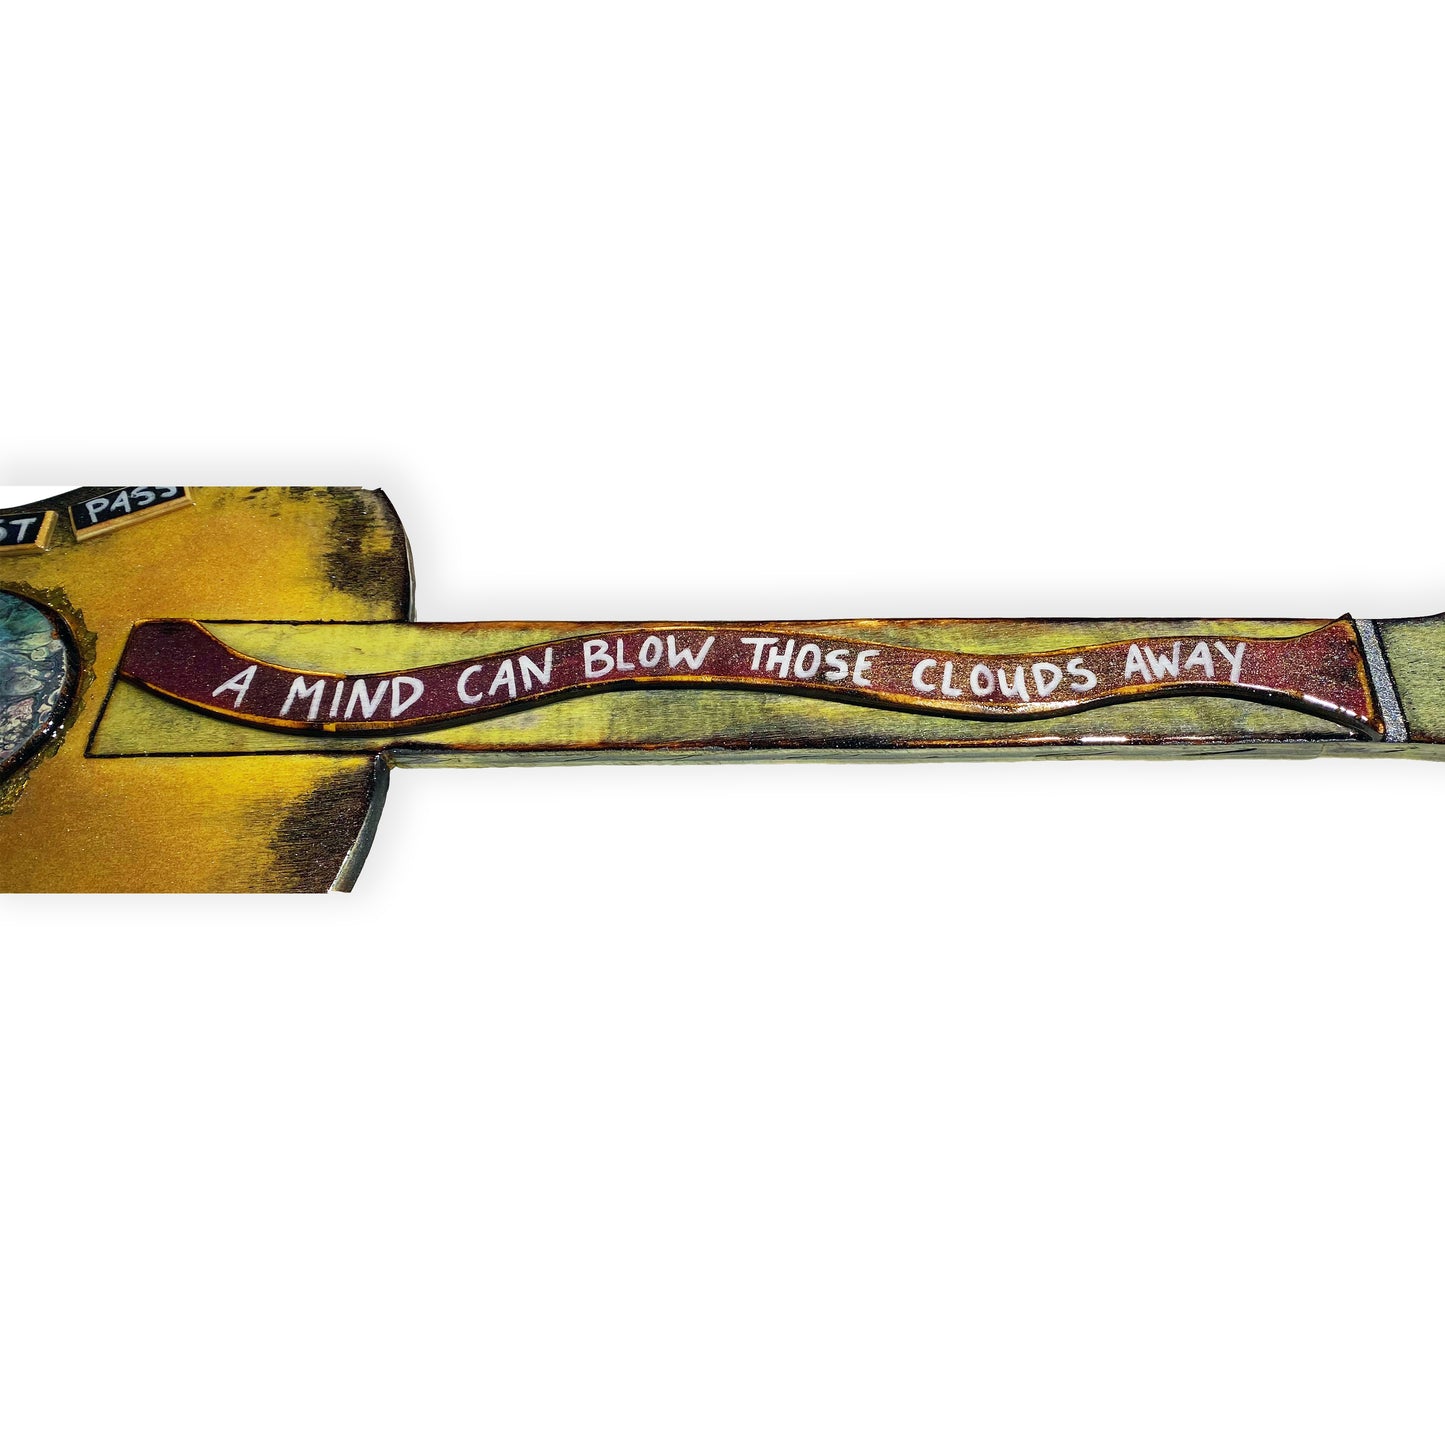 All things must pass (38" long)